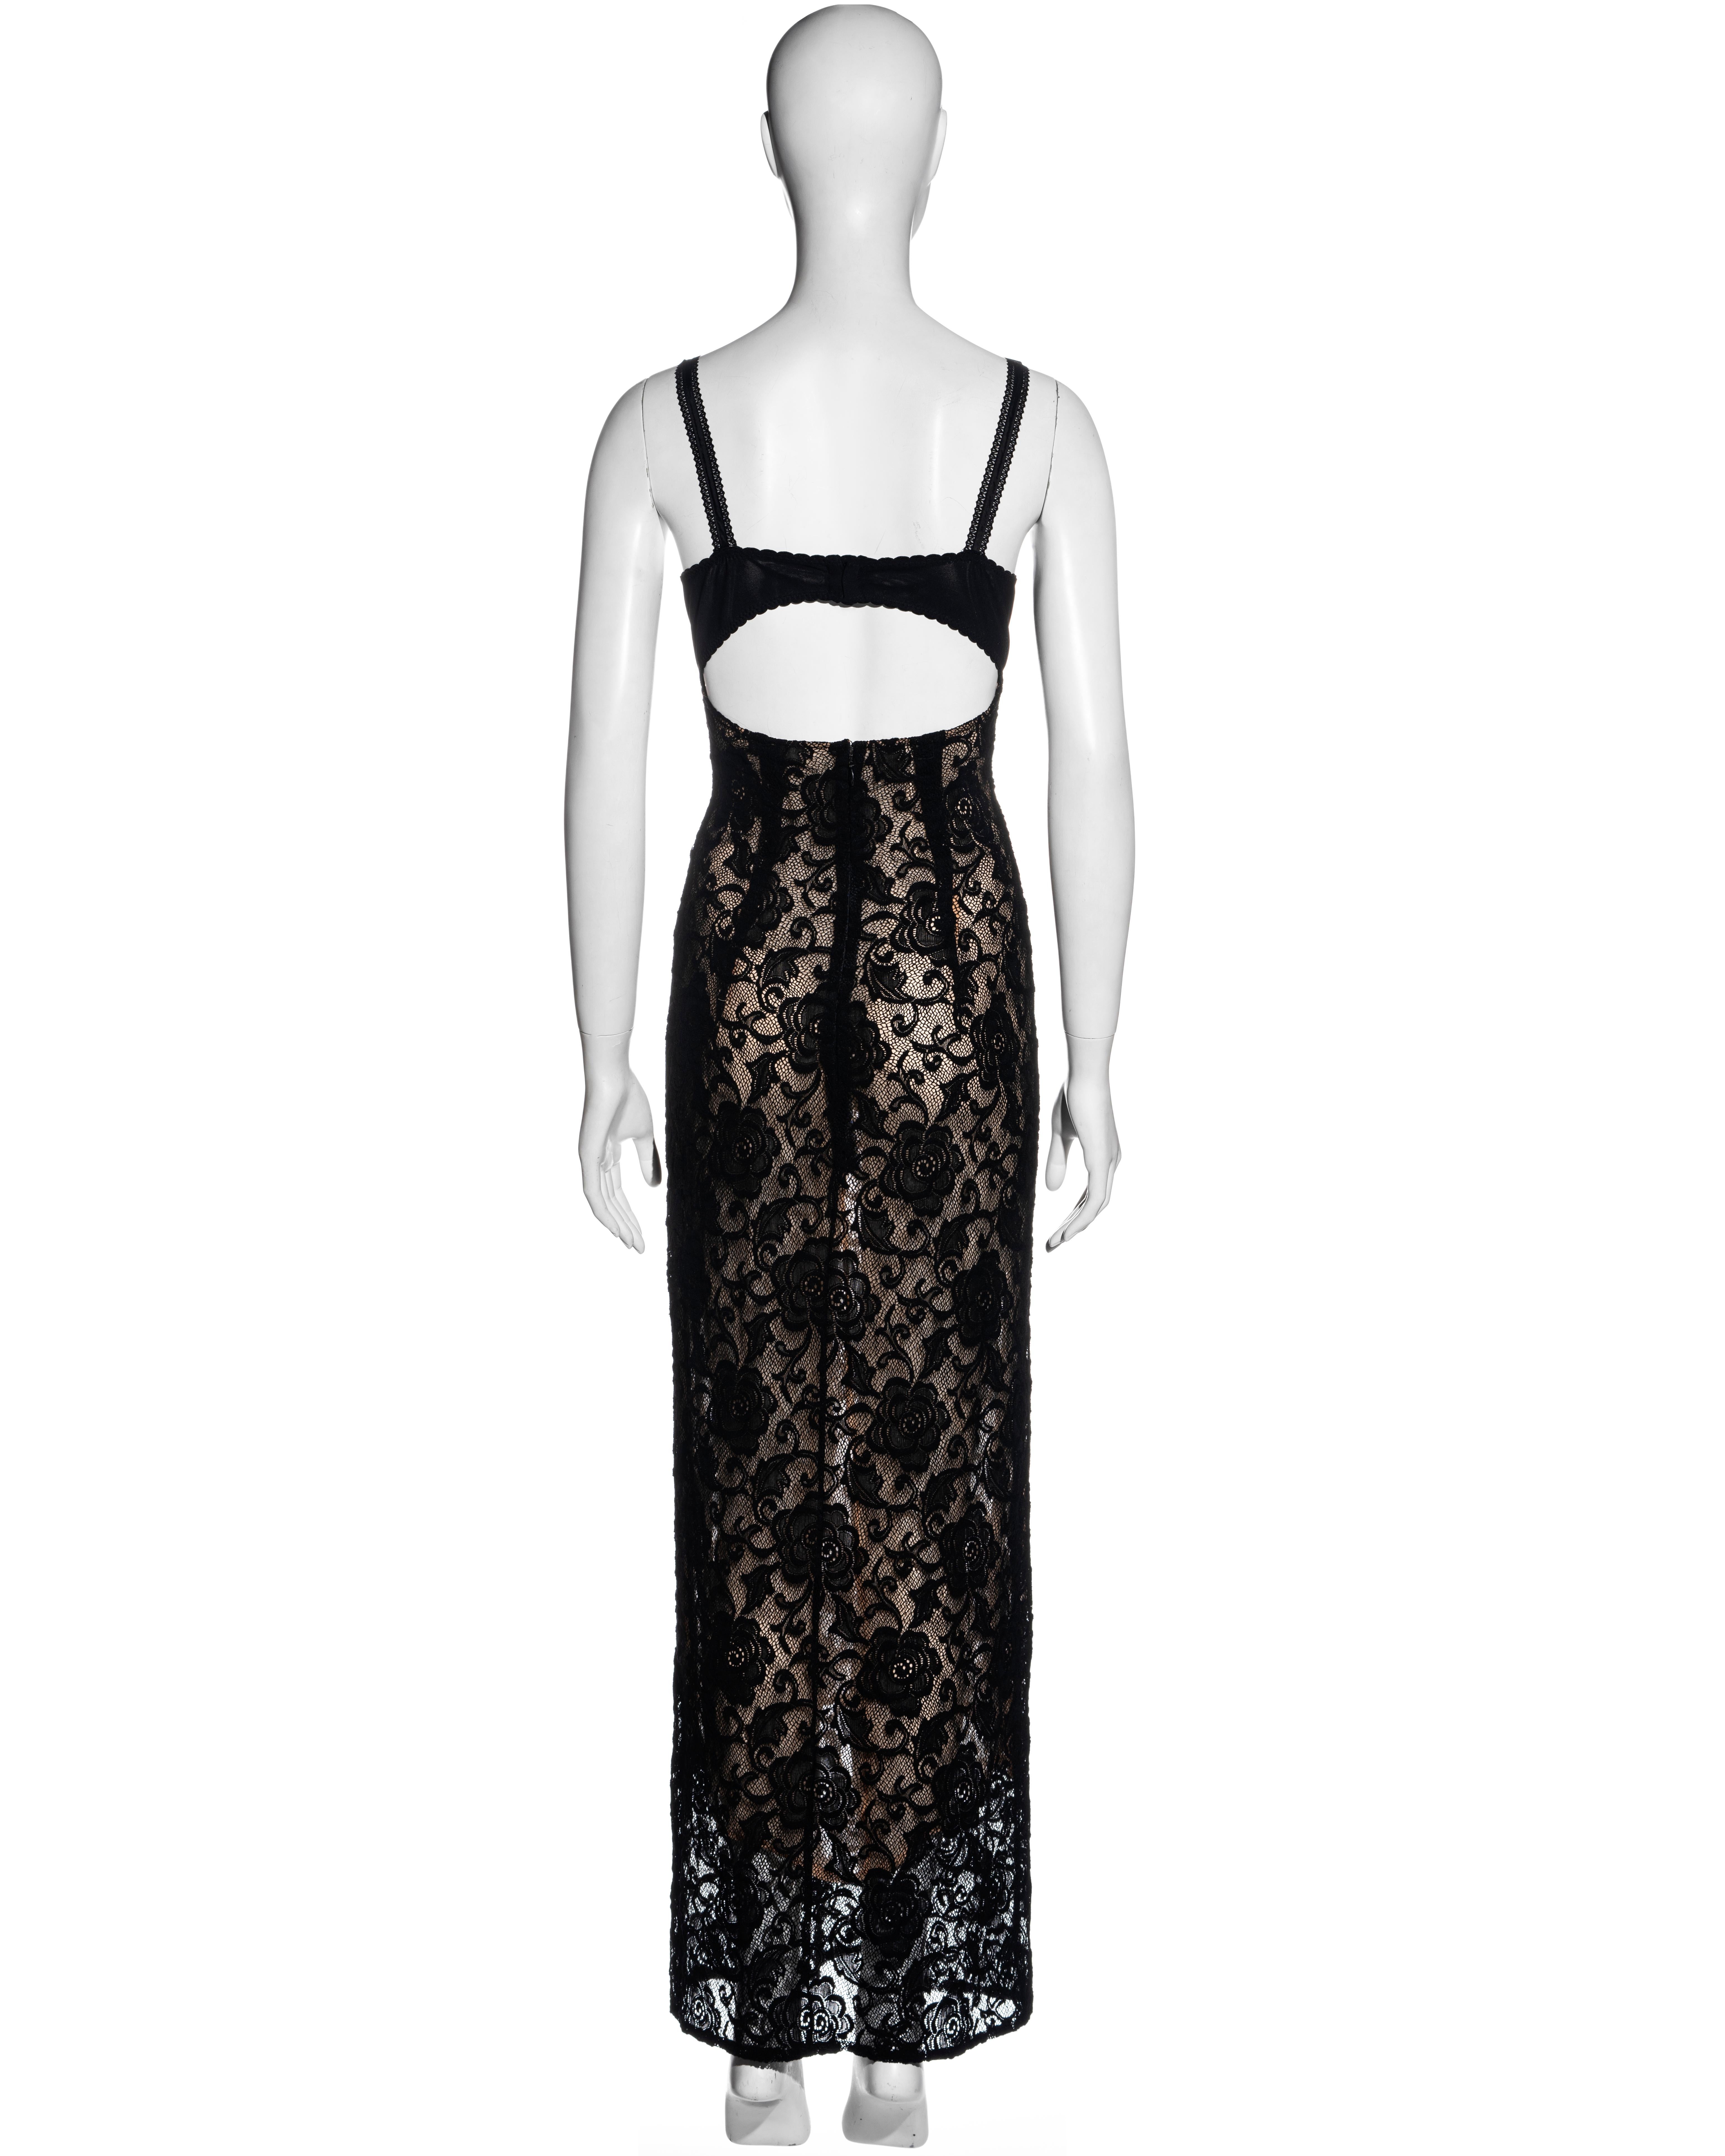 Dolce & Gabbana black lace evening dress with attached bra, ss 1997 2